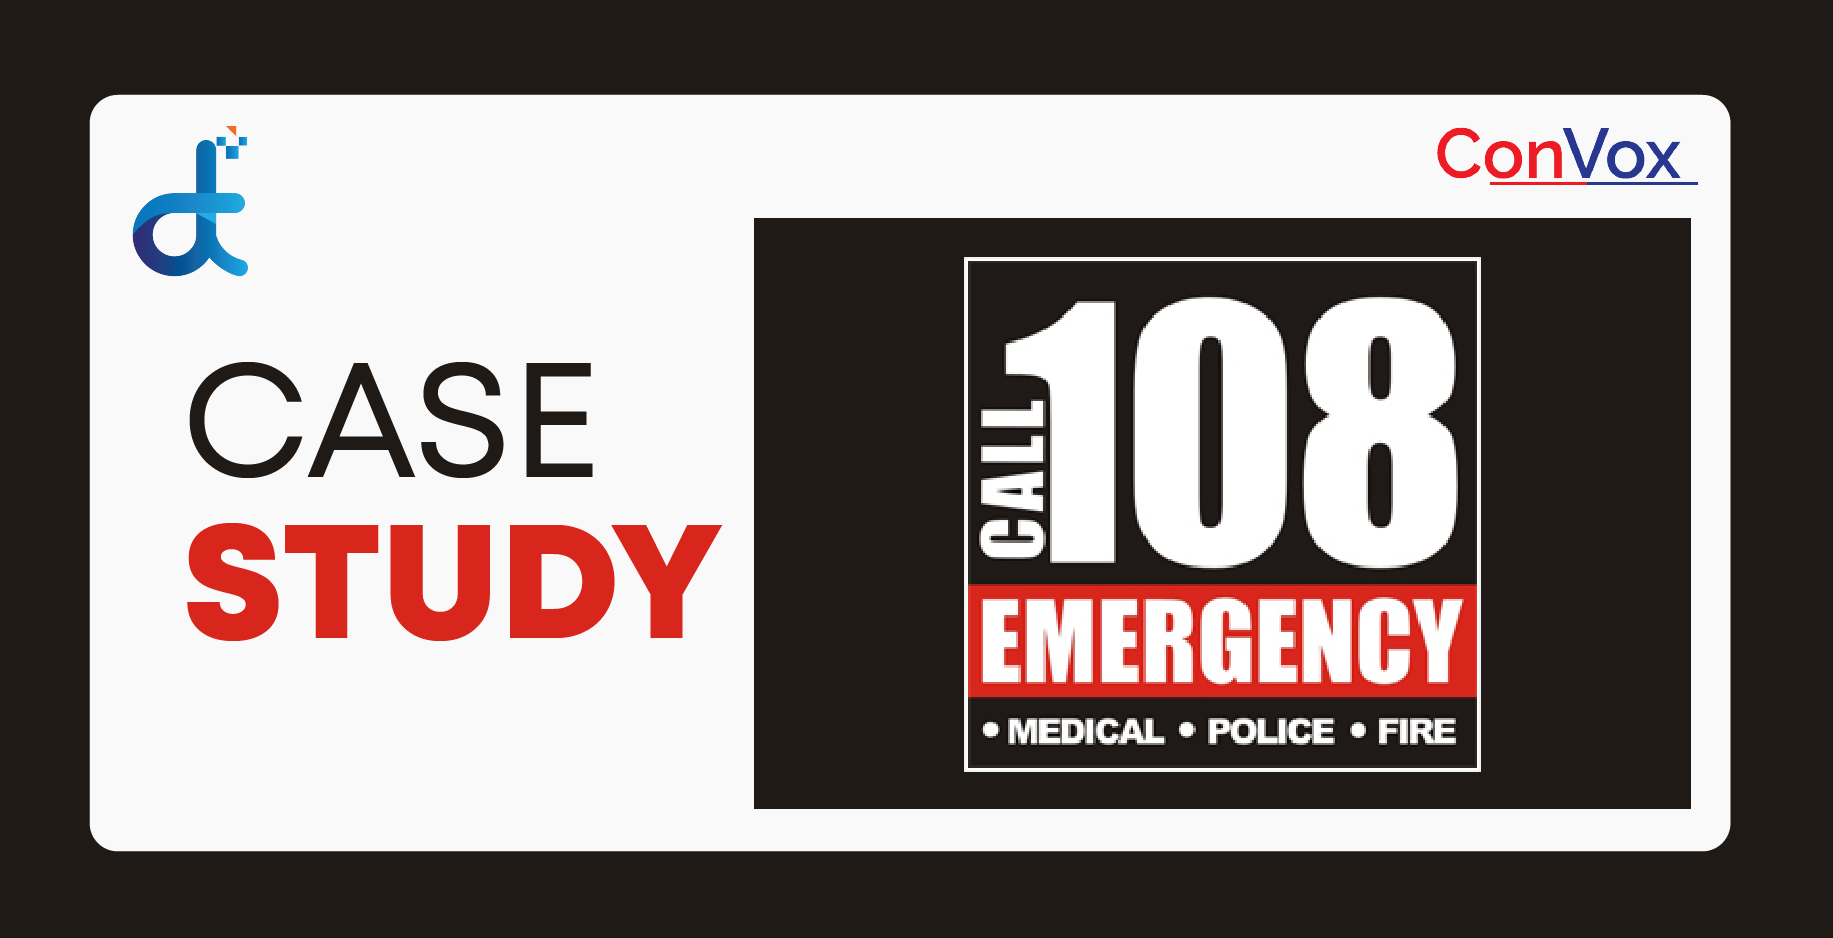 108 Healthcare Emergency Services Featured Image